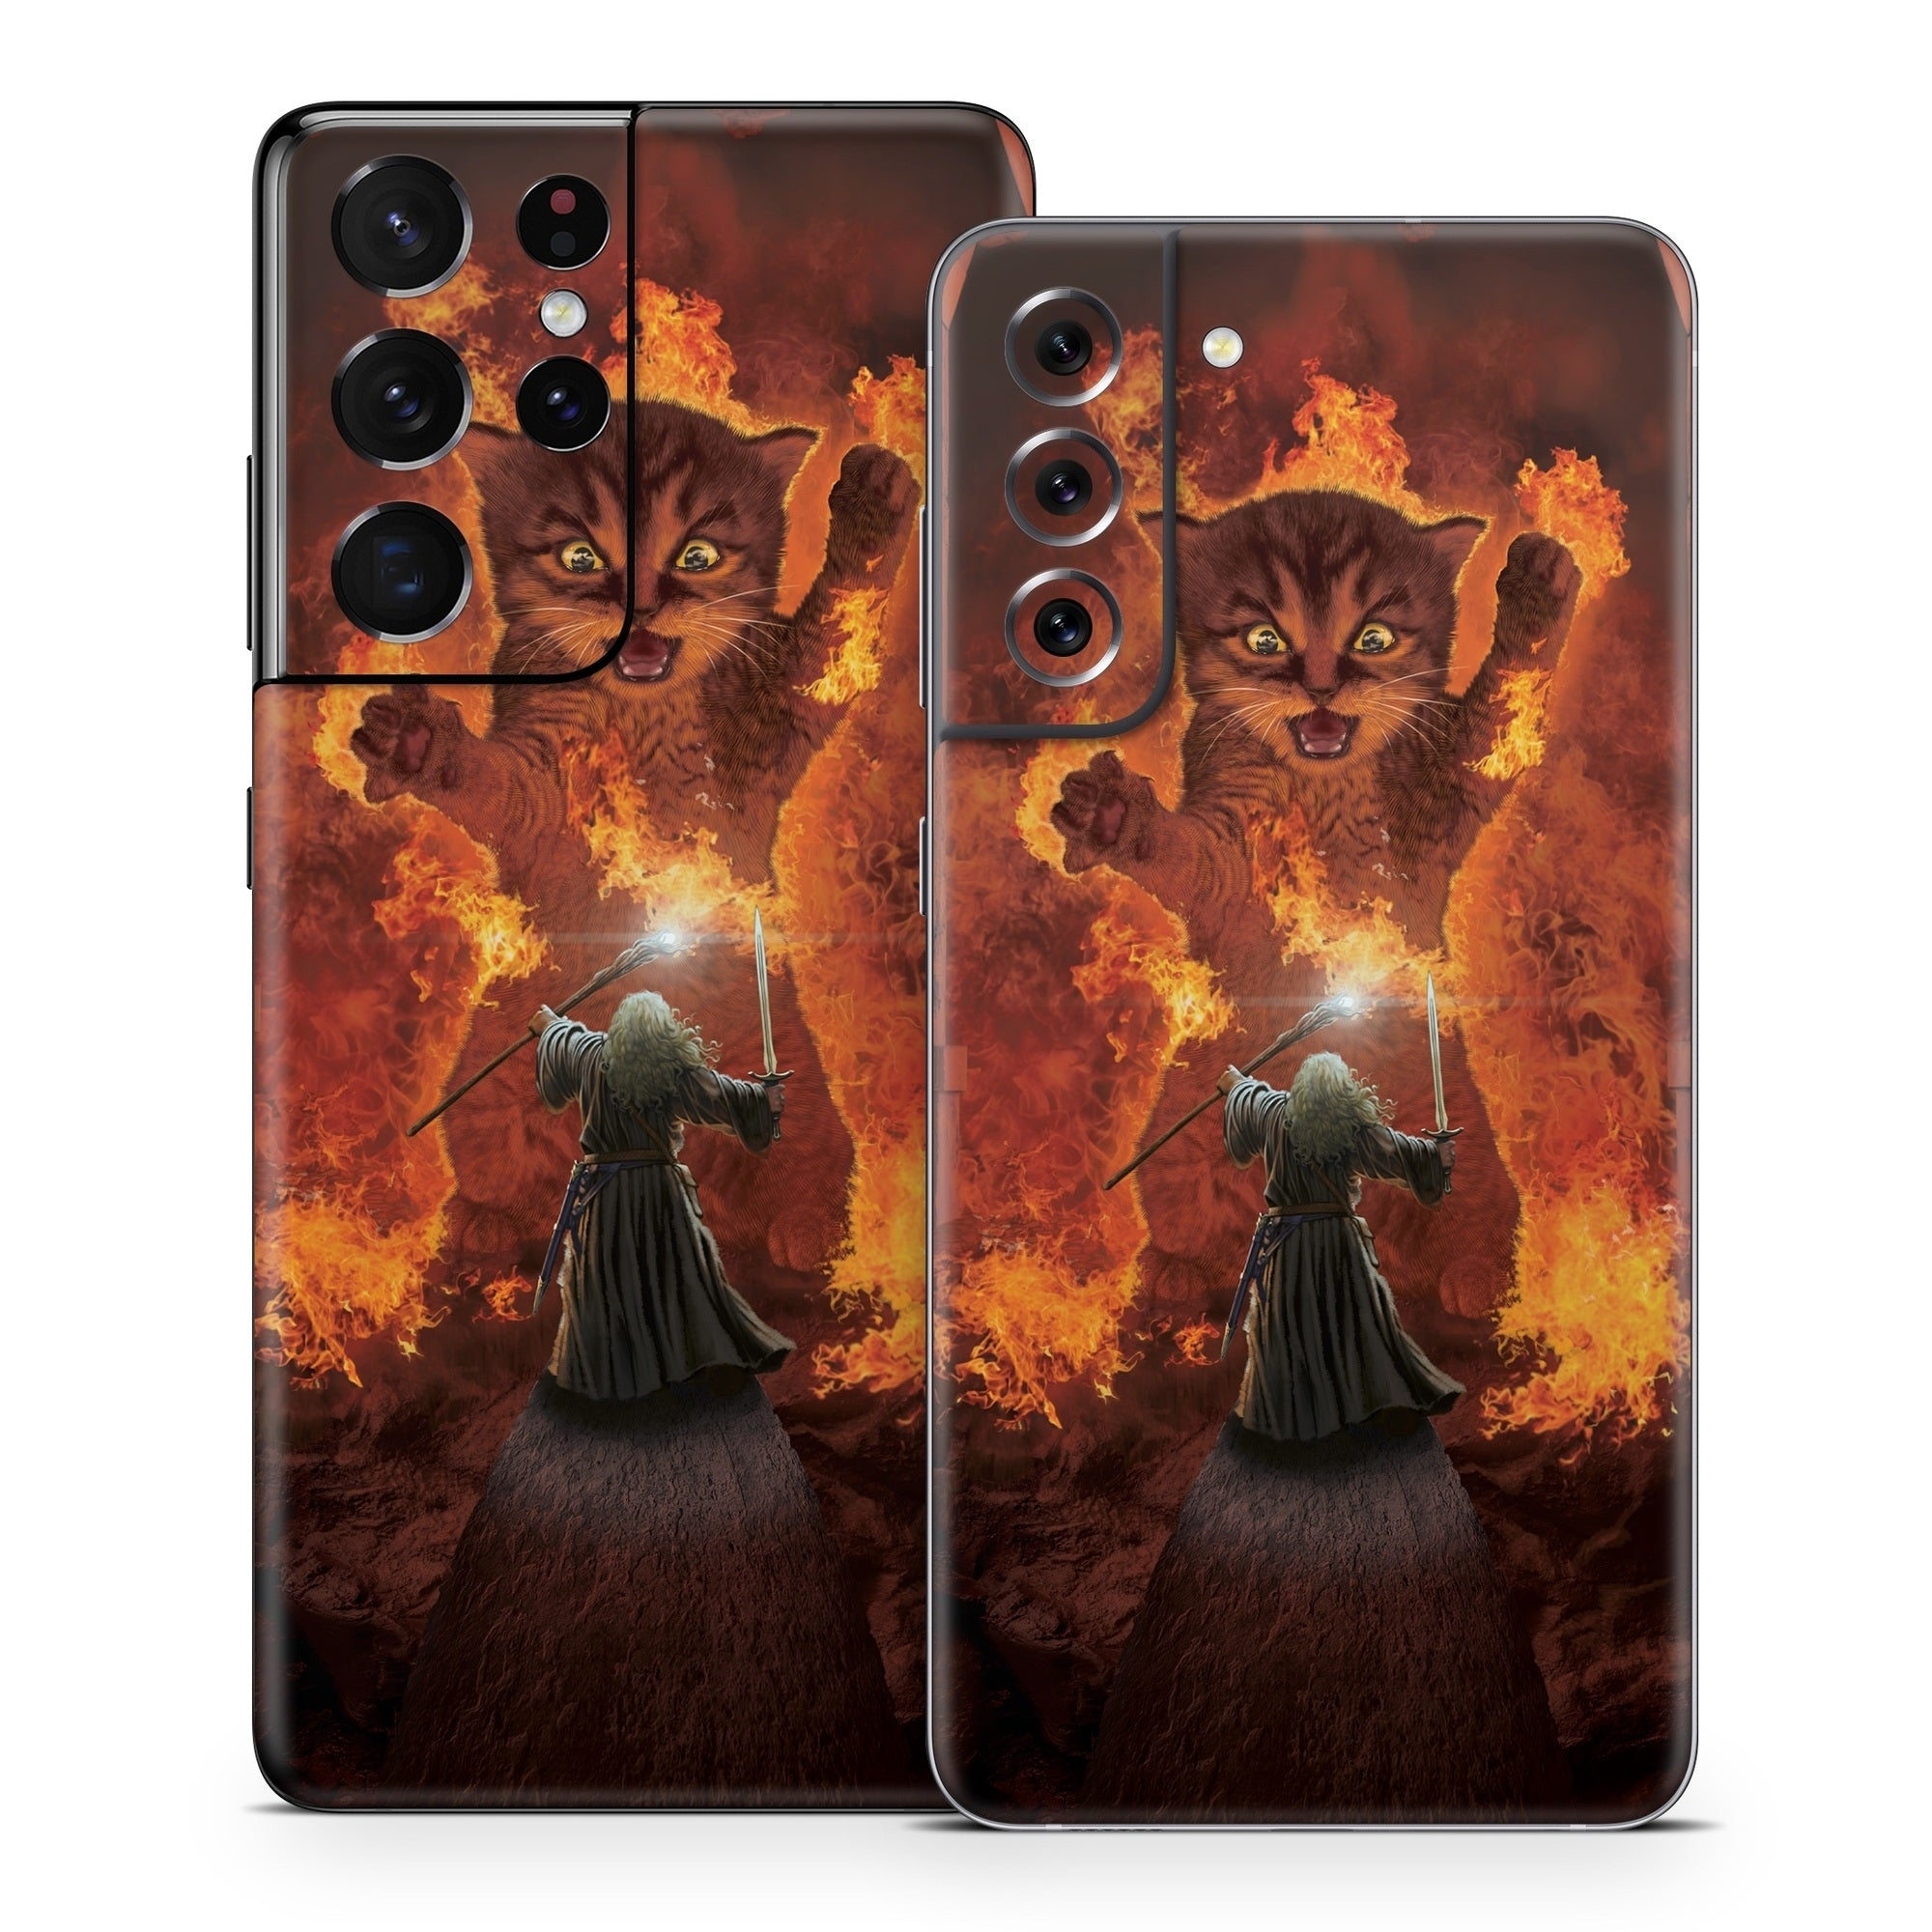 You Shall Not Pass - Samsung Galaxy S21 Skin